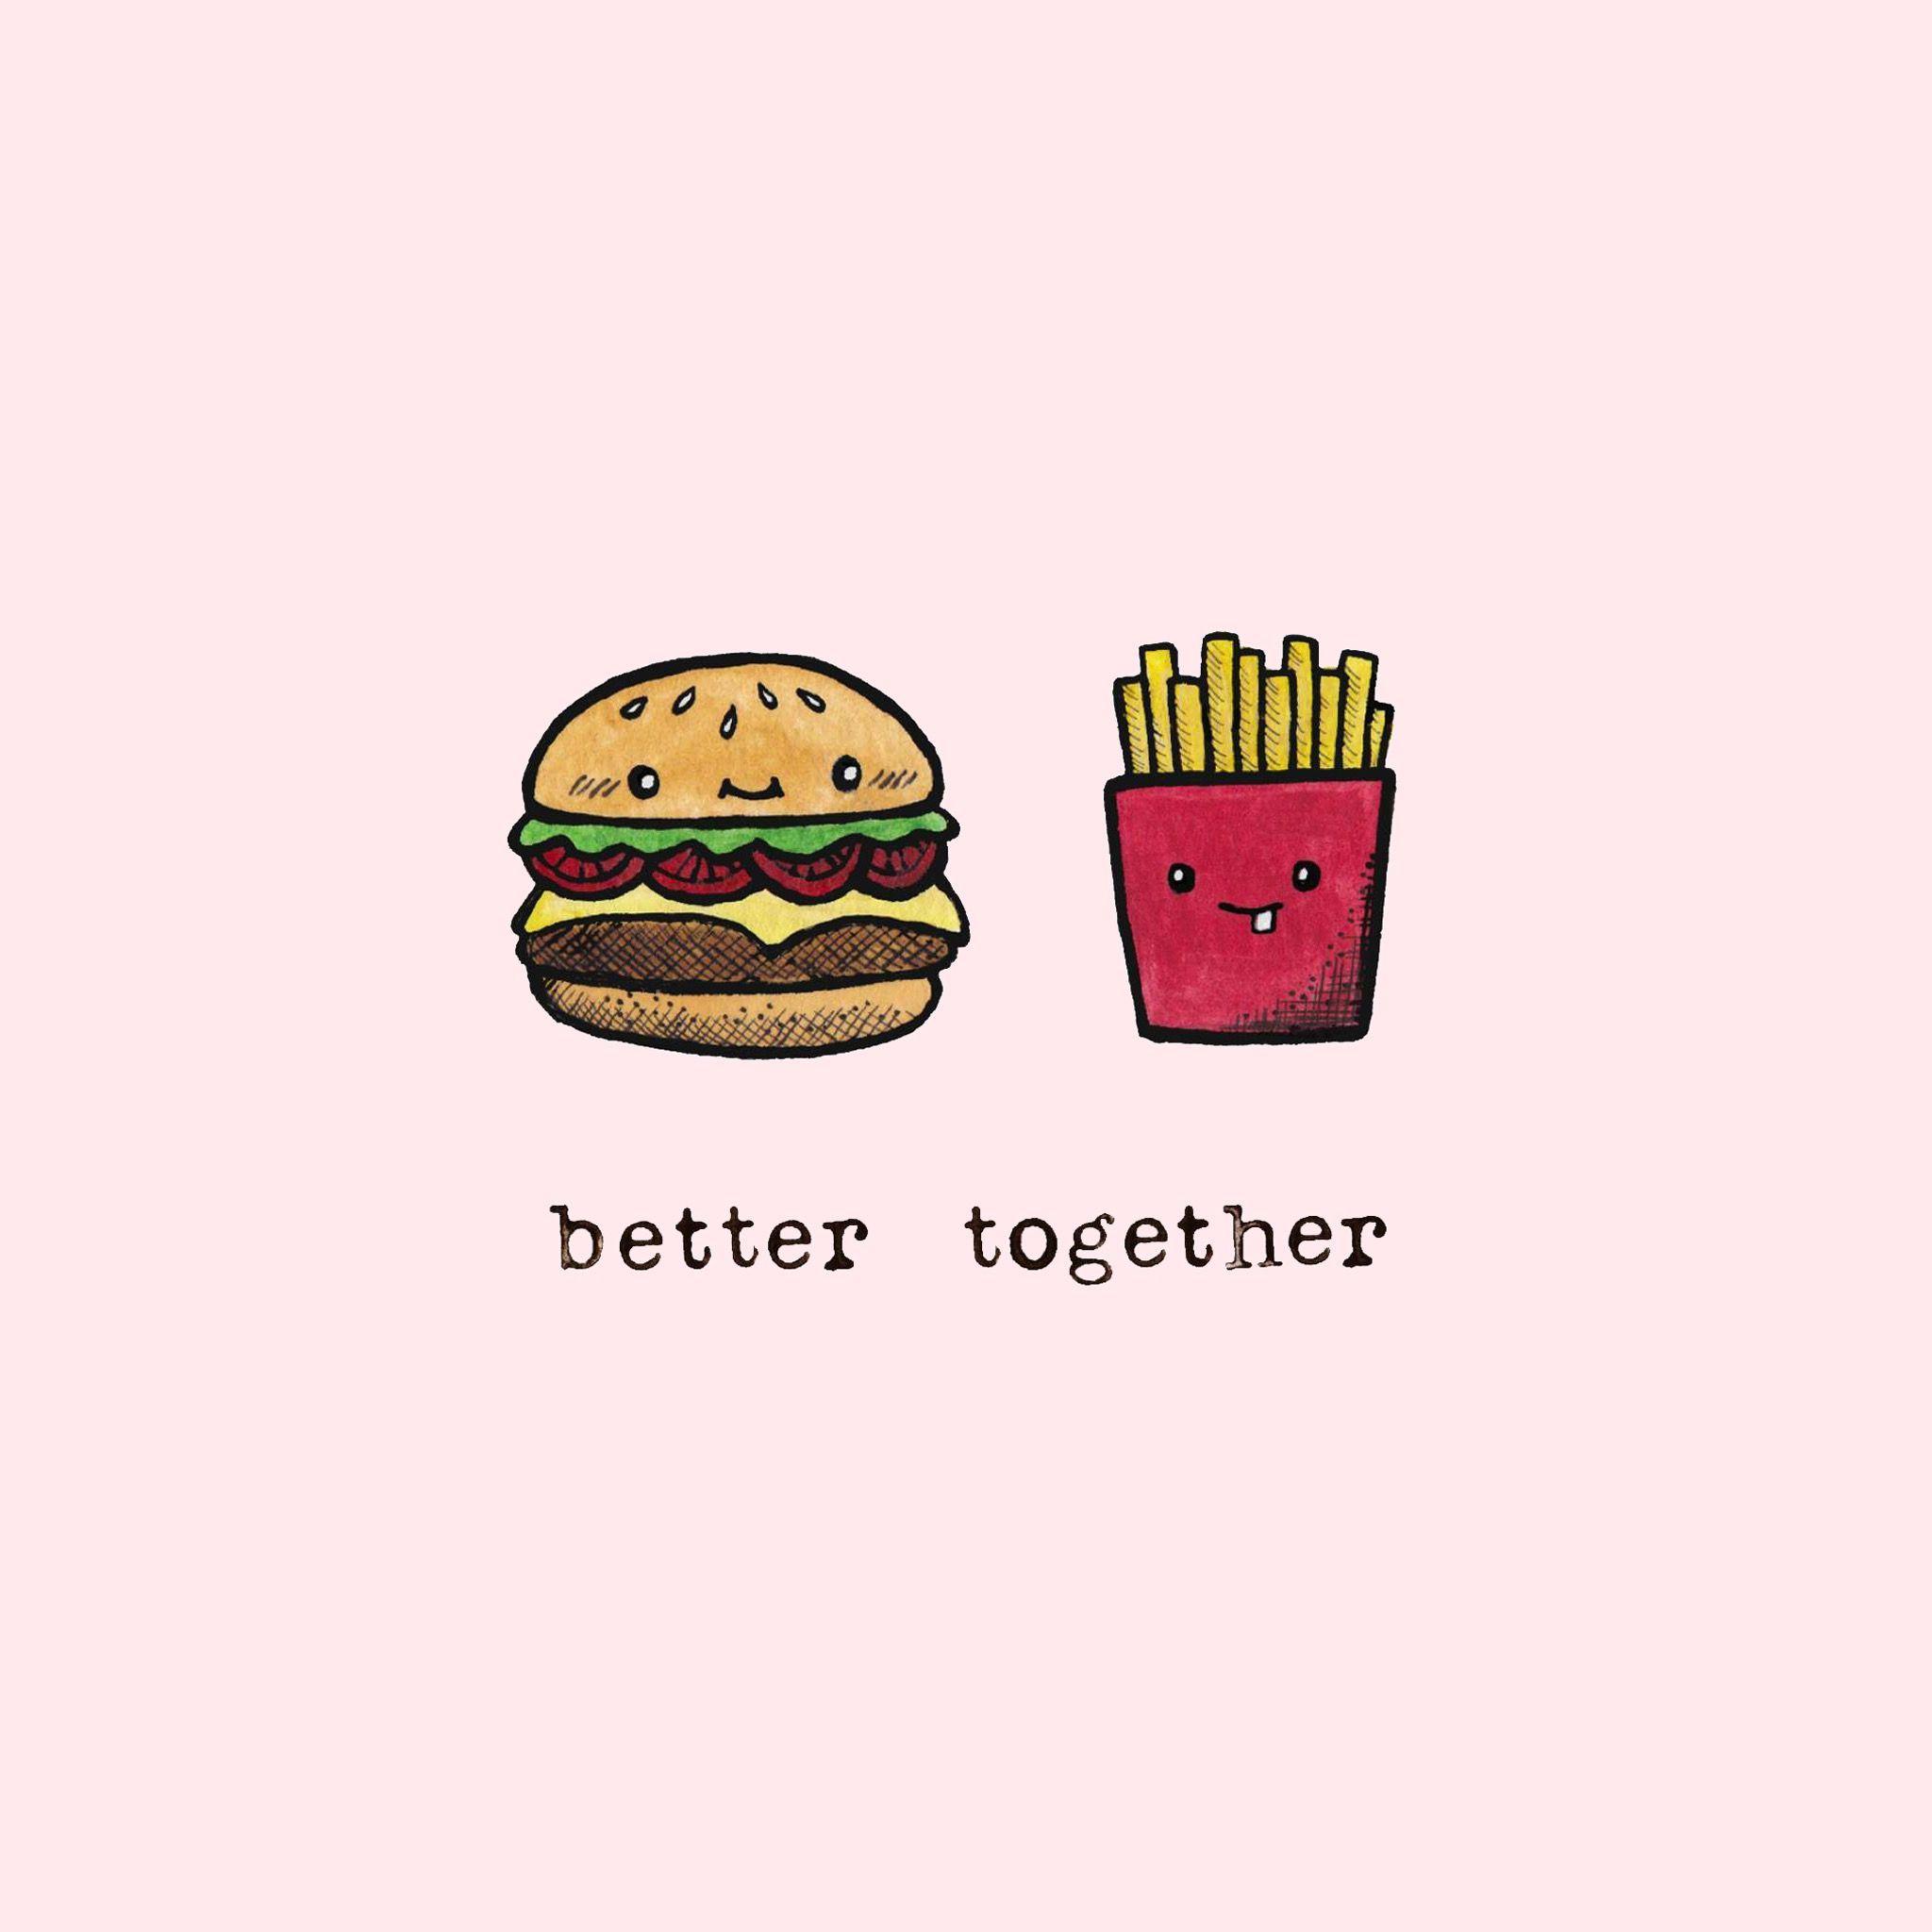 Better together wallpaper. WALPAPERS. Wallpaper, Cute food